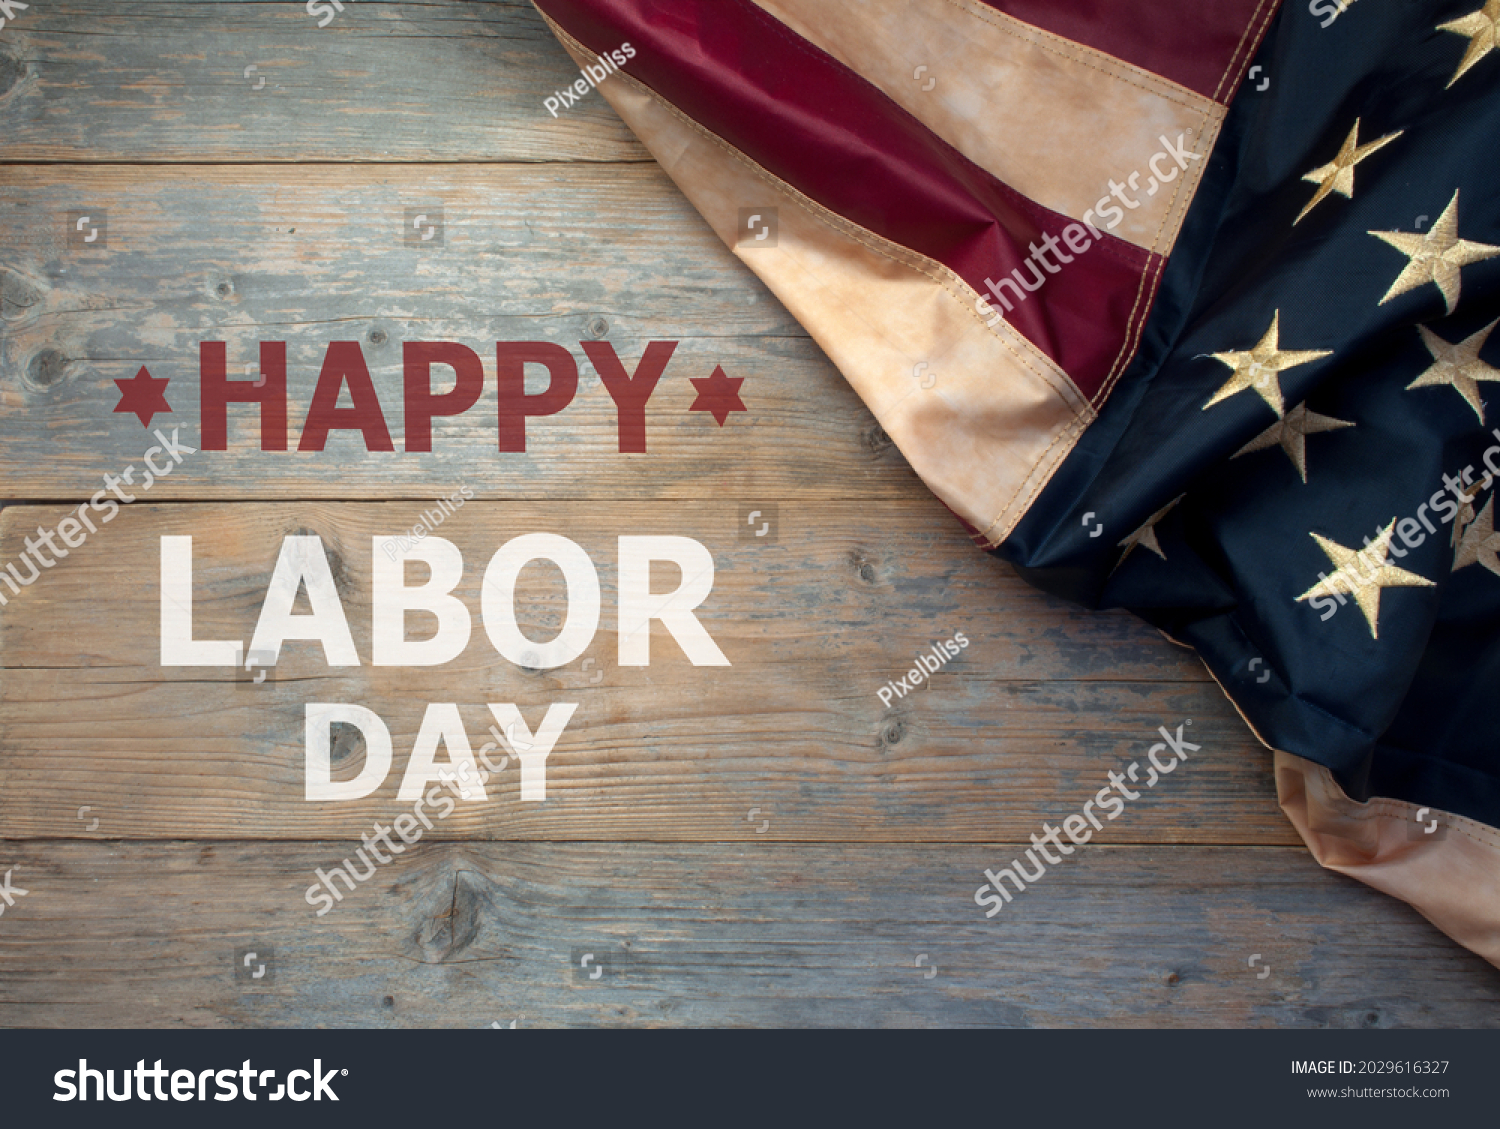 Happy day labor day banner message with American flag #2029616327